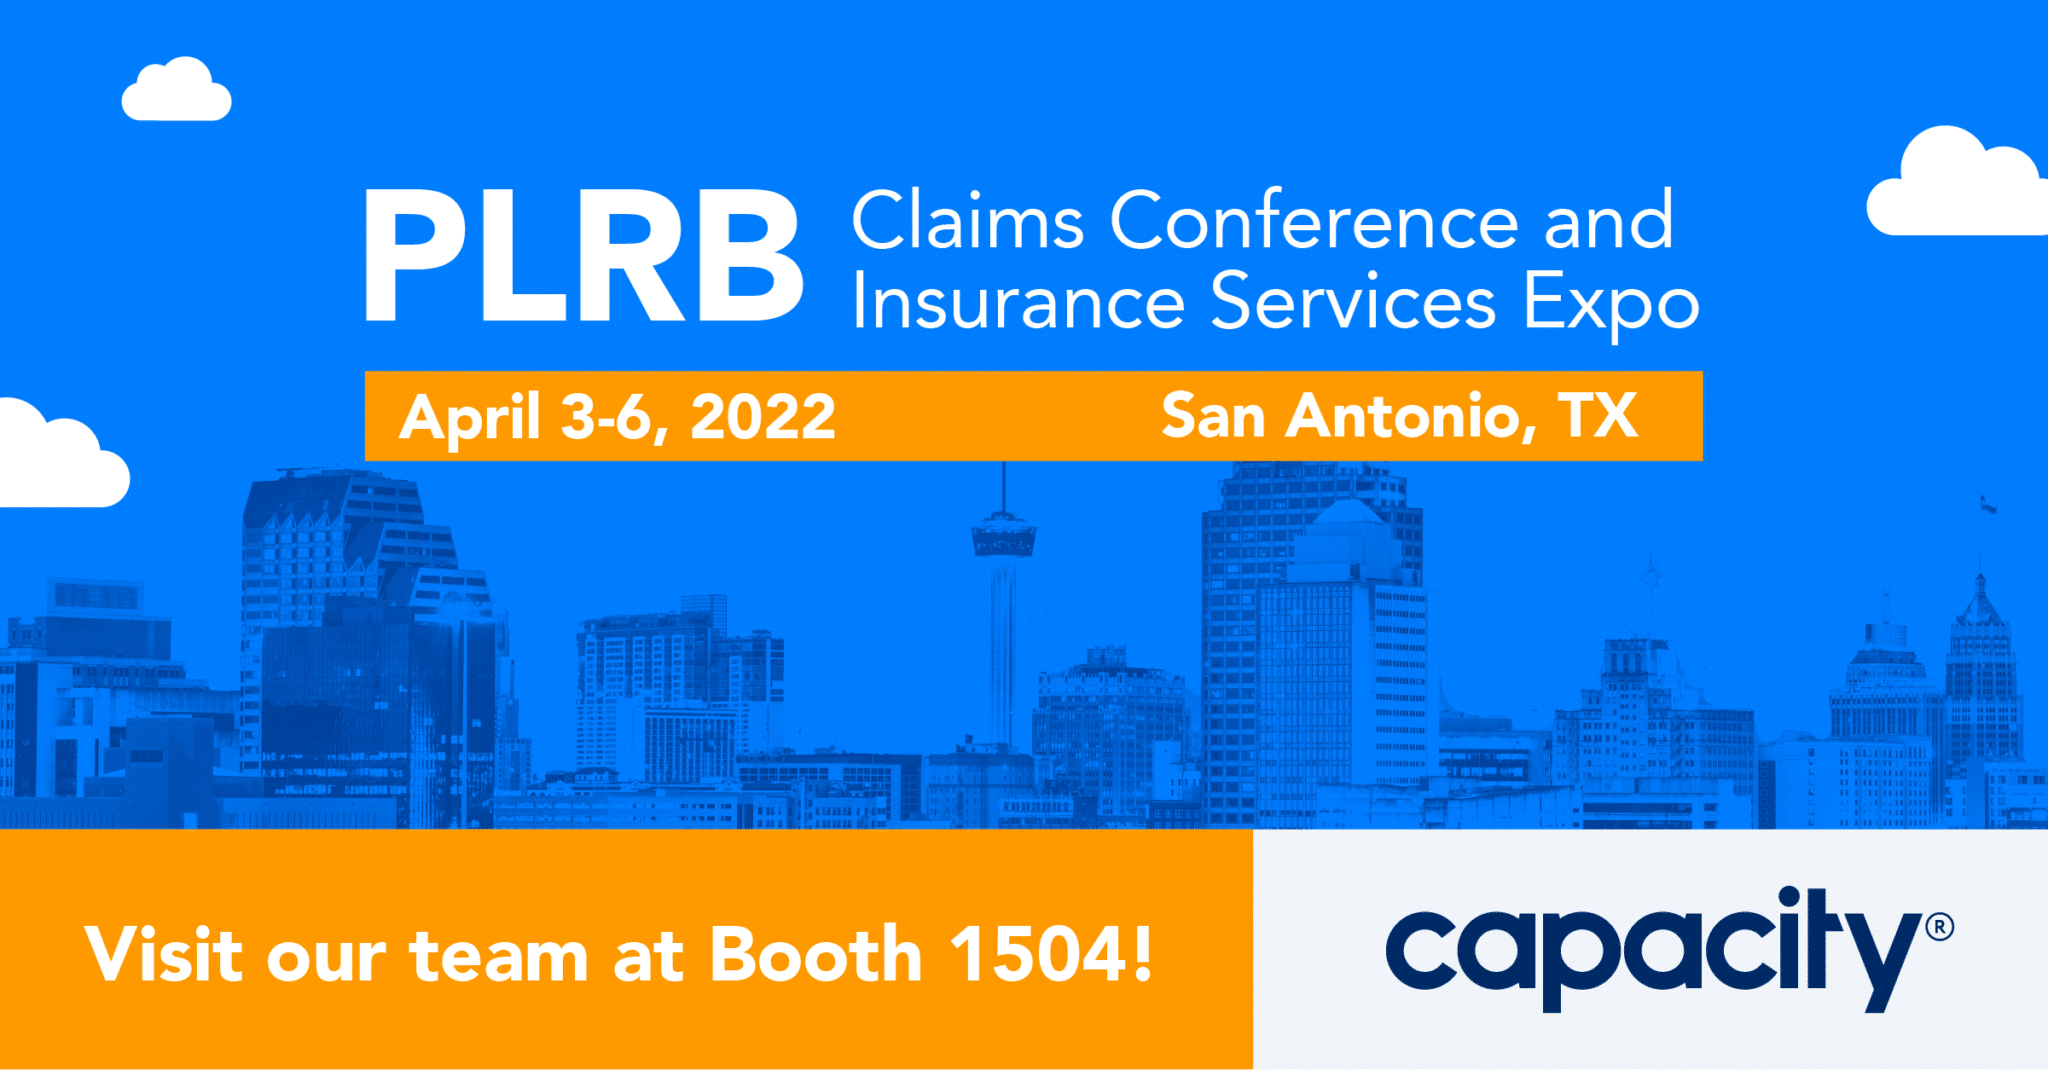 PLRB Claims Conference & Insurance Services Expo Capacity